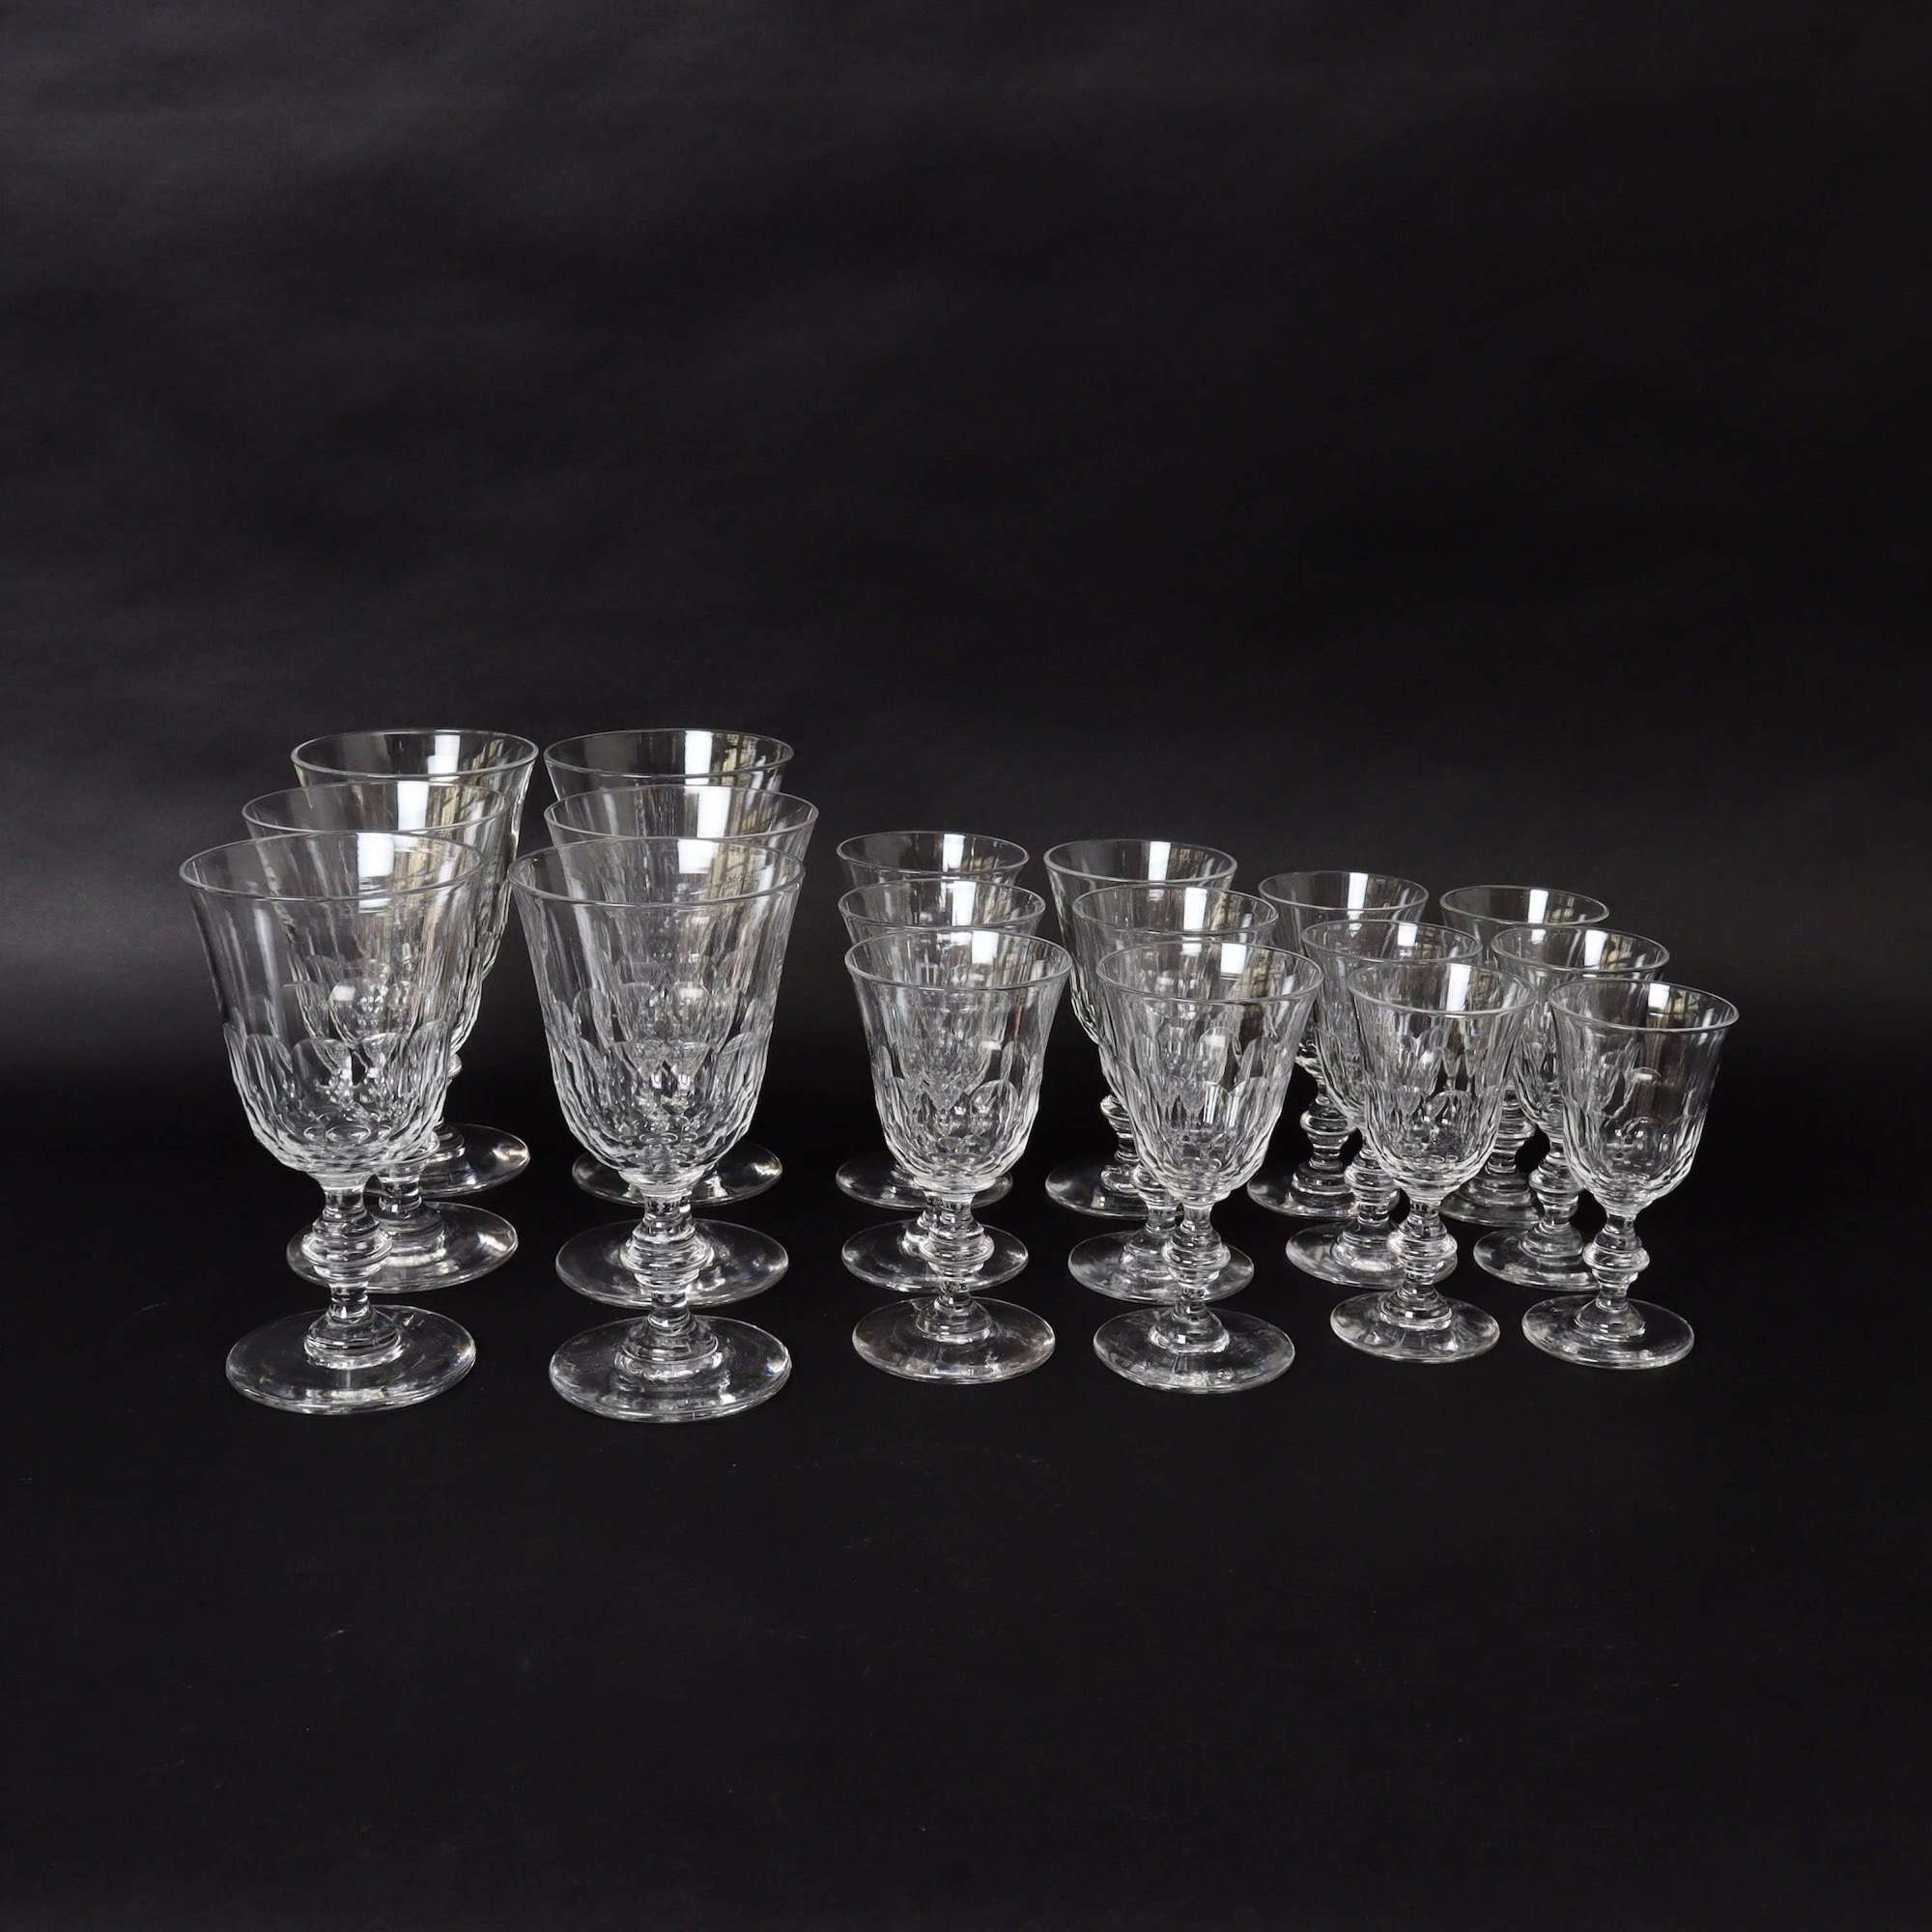 Suite of Baccarat Crystal Glasses